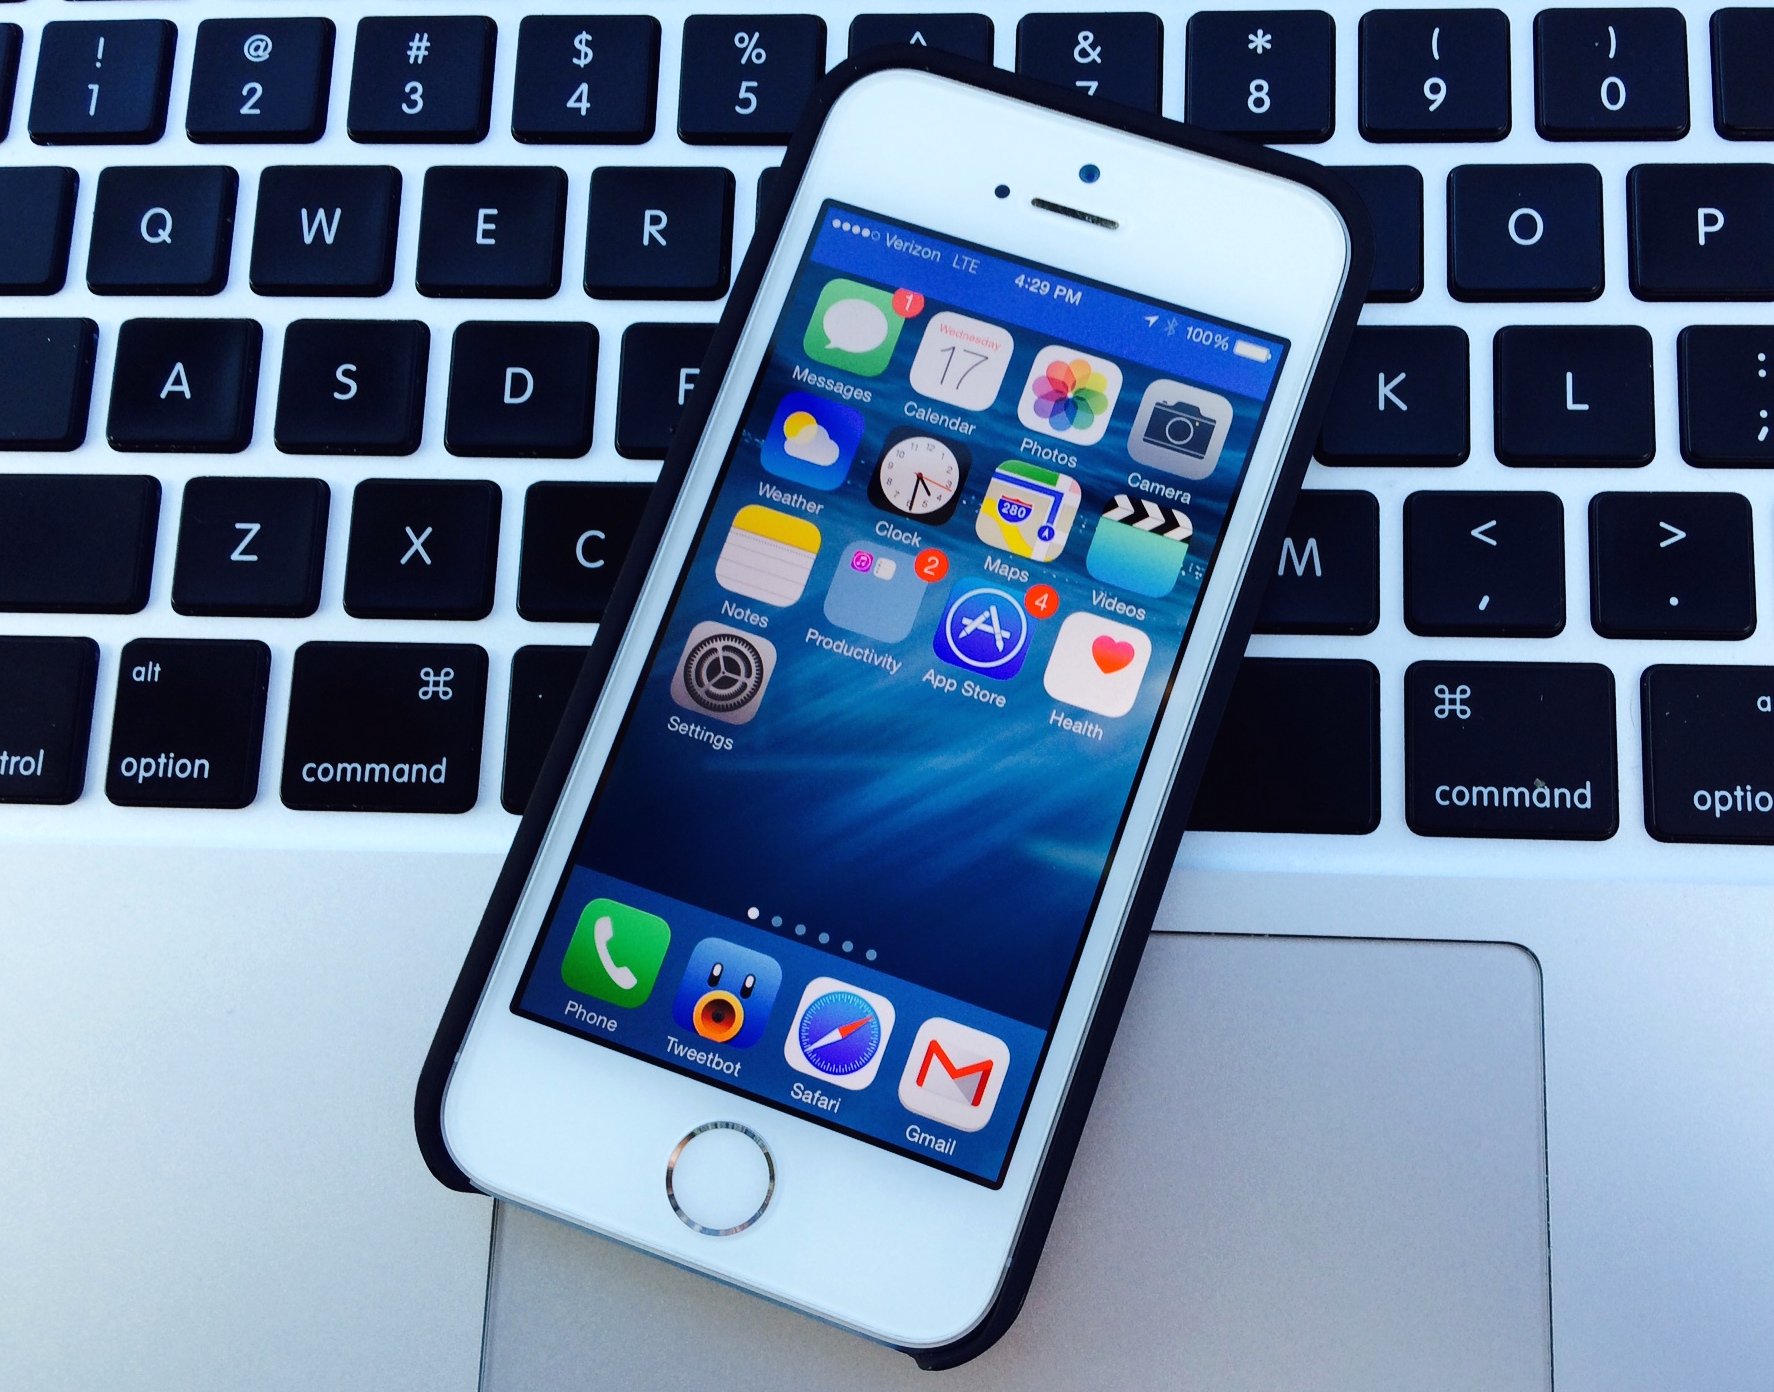 Here's a closer look at the iOS 8 performance on the iPhone 5s.